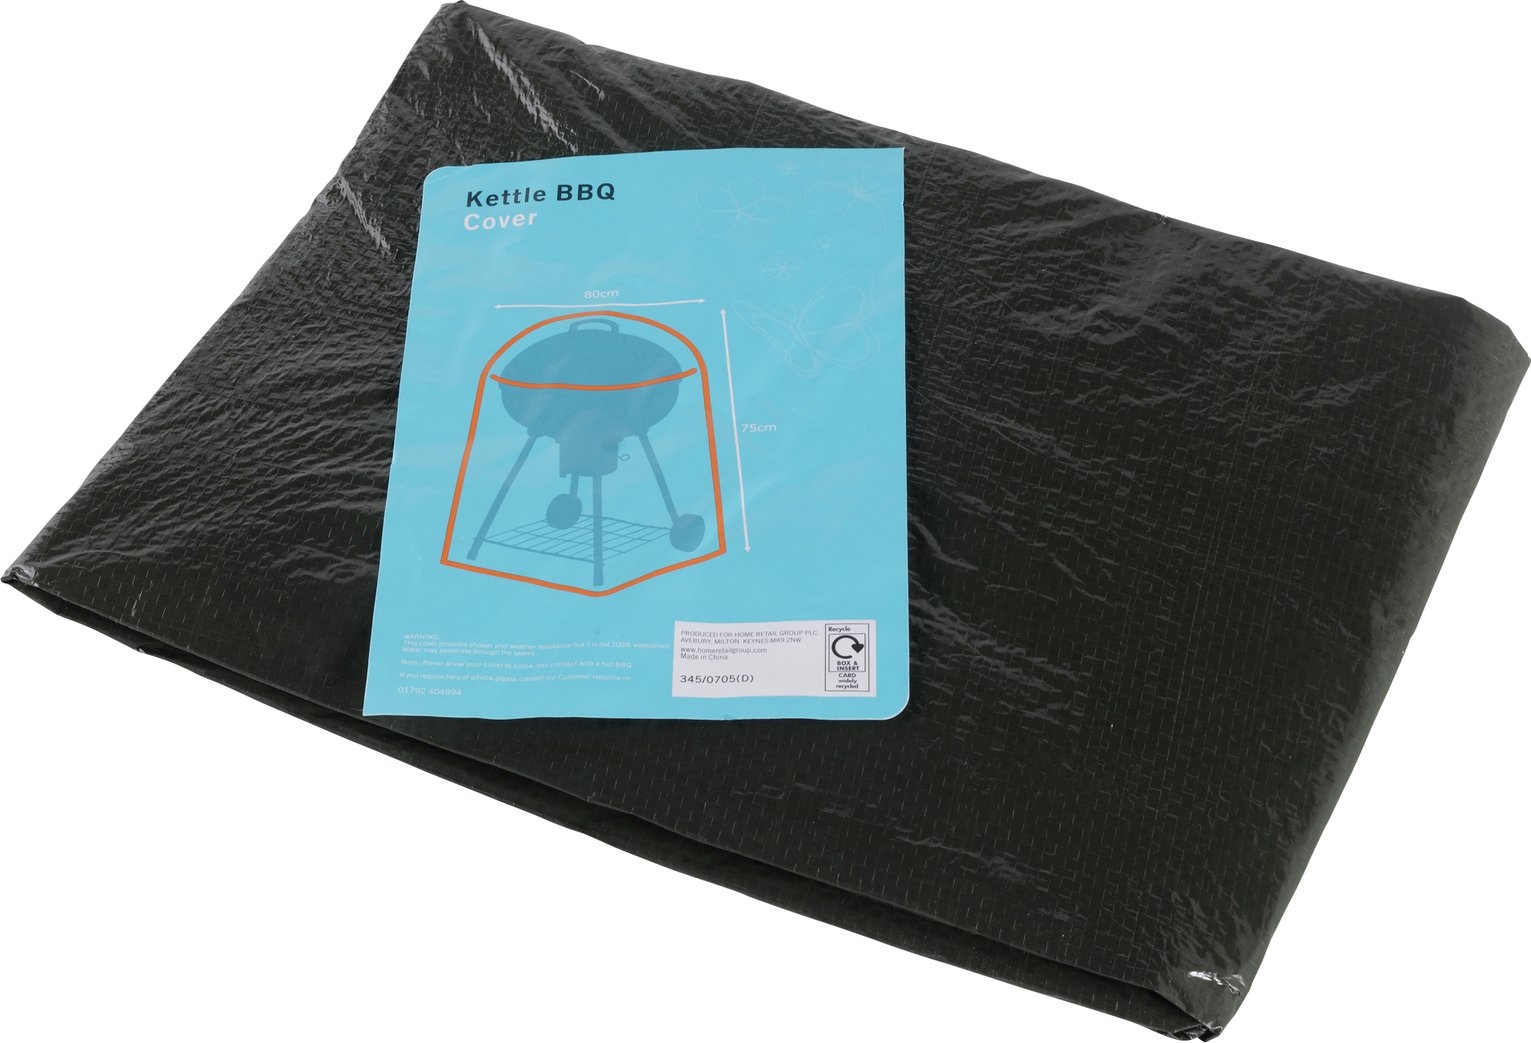 Kettle BBQ Cover Review